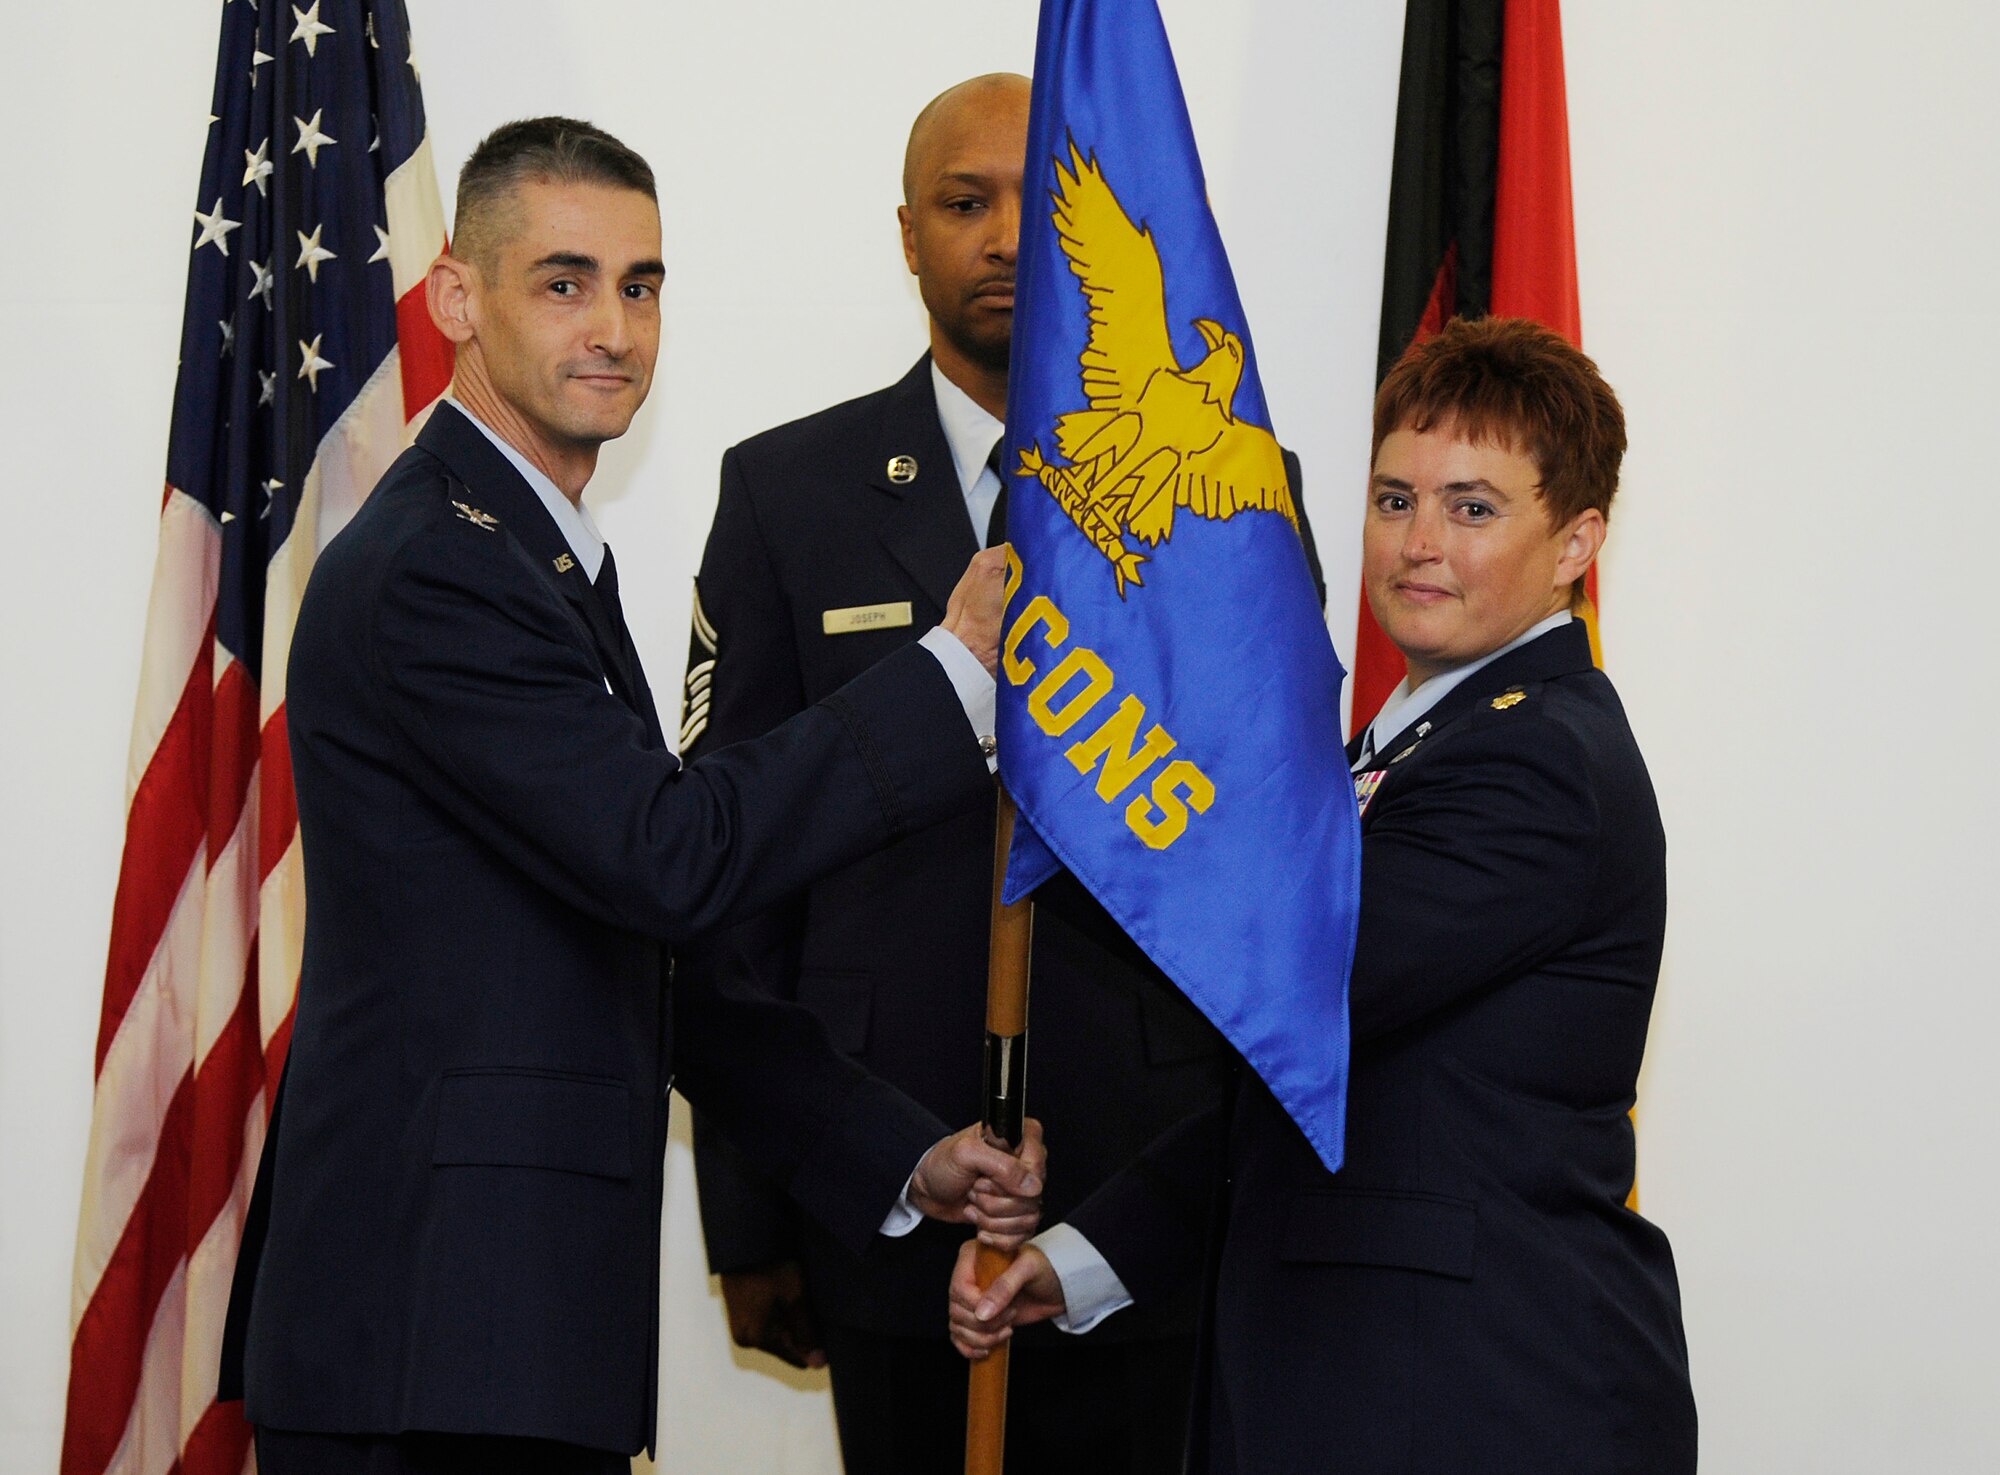 Col. Mario Troncoso, Air Force Installation Contracting Agency director, passes the guidon to Maj. Rachelle Osborn, symbolizing her taking command of the 764th Specialized Contracting Squadron during an activation ceremony at Ramstein Air Base, Germany Oct. 2, 2013. The 764th SCONS is a newly formed squadron that will provide contracting support to all of U.S. Air Forces Europe and Air Forces Africa bases for projects worth more than $2 million or if allocated money will be used at multiple locations. Osborn was previously in charge of the specialized contracting flight under the 700th Contracting Squadron. (U.S. Air Force photo/ Staff Sgt. Ryan Crane)